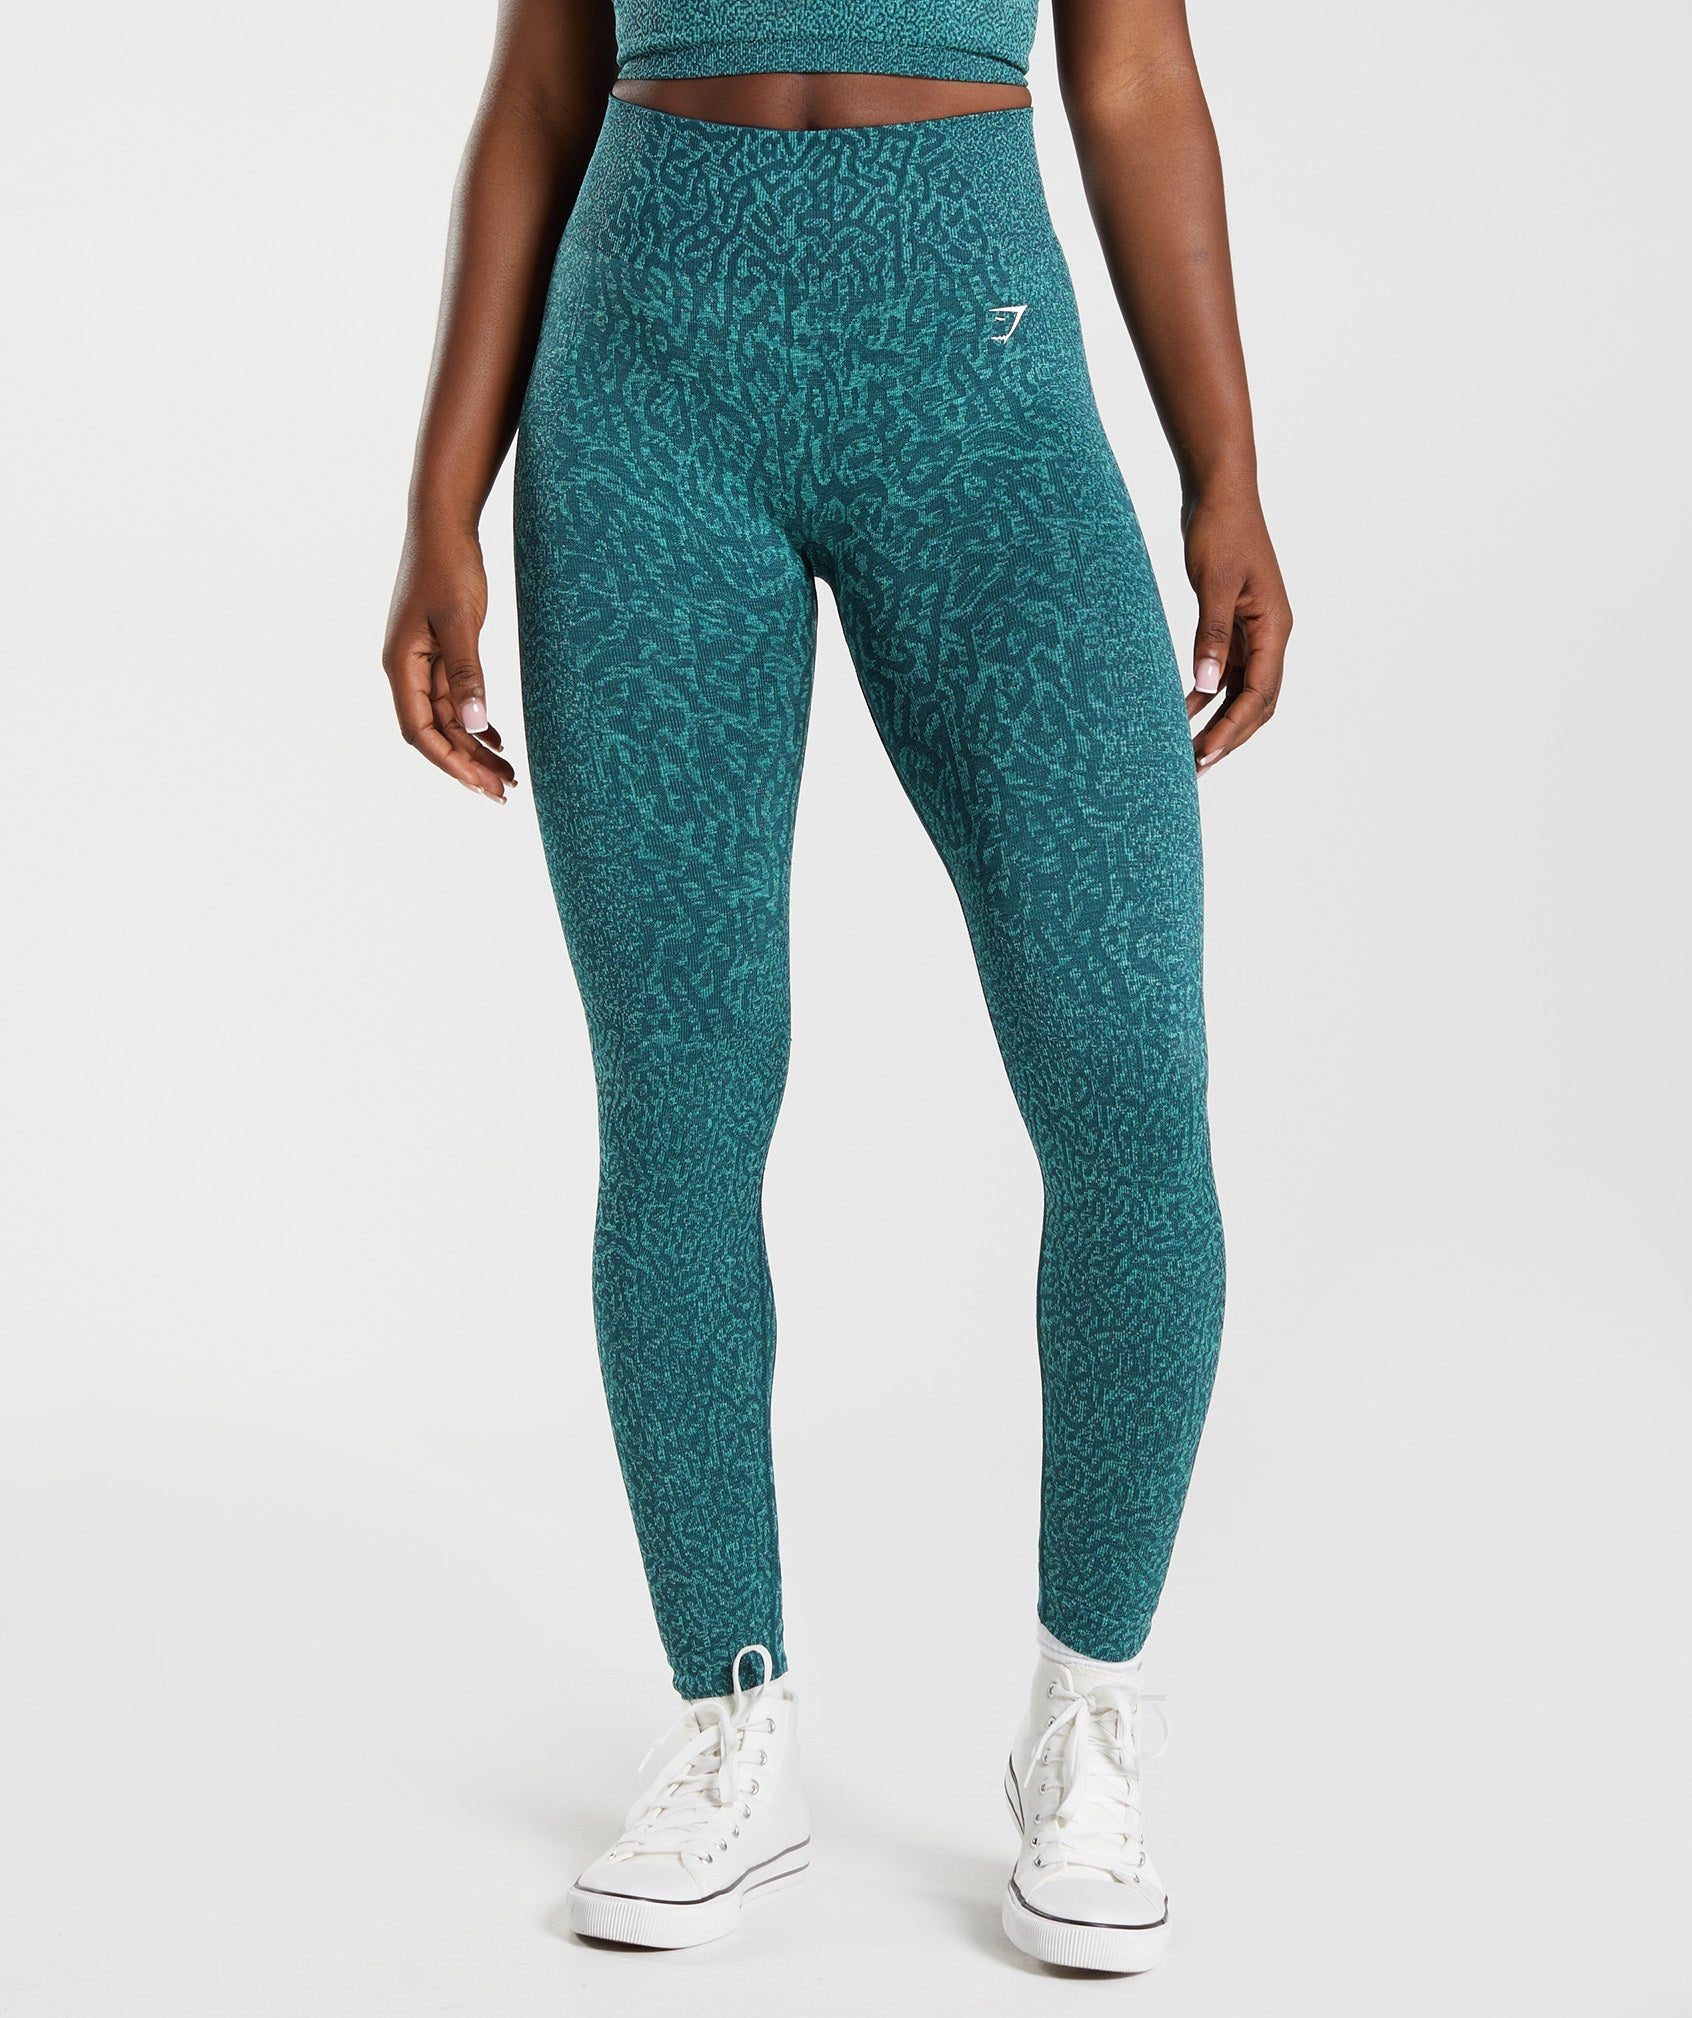 Buy Animal Print Supersoft Everyday Sports Leggings from Next France